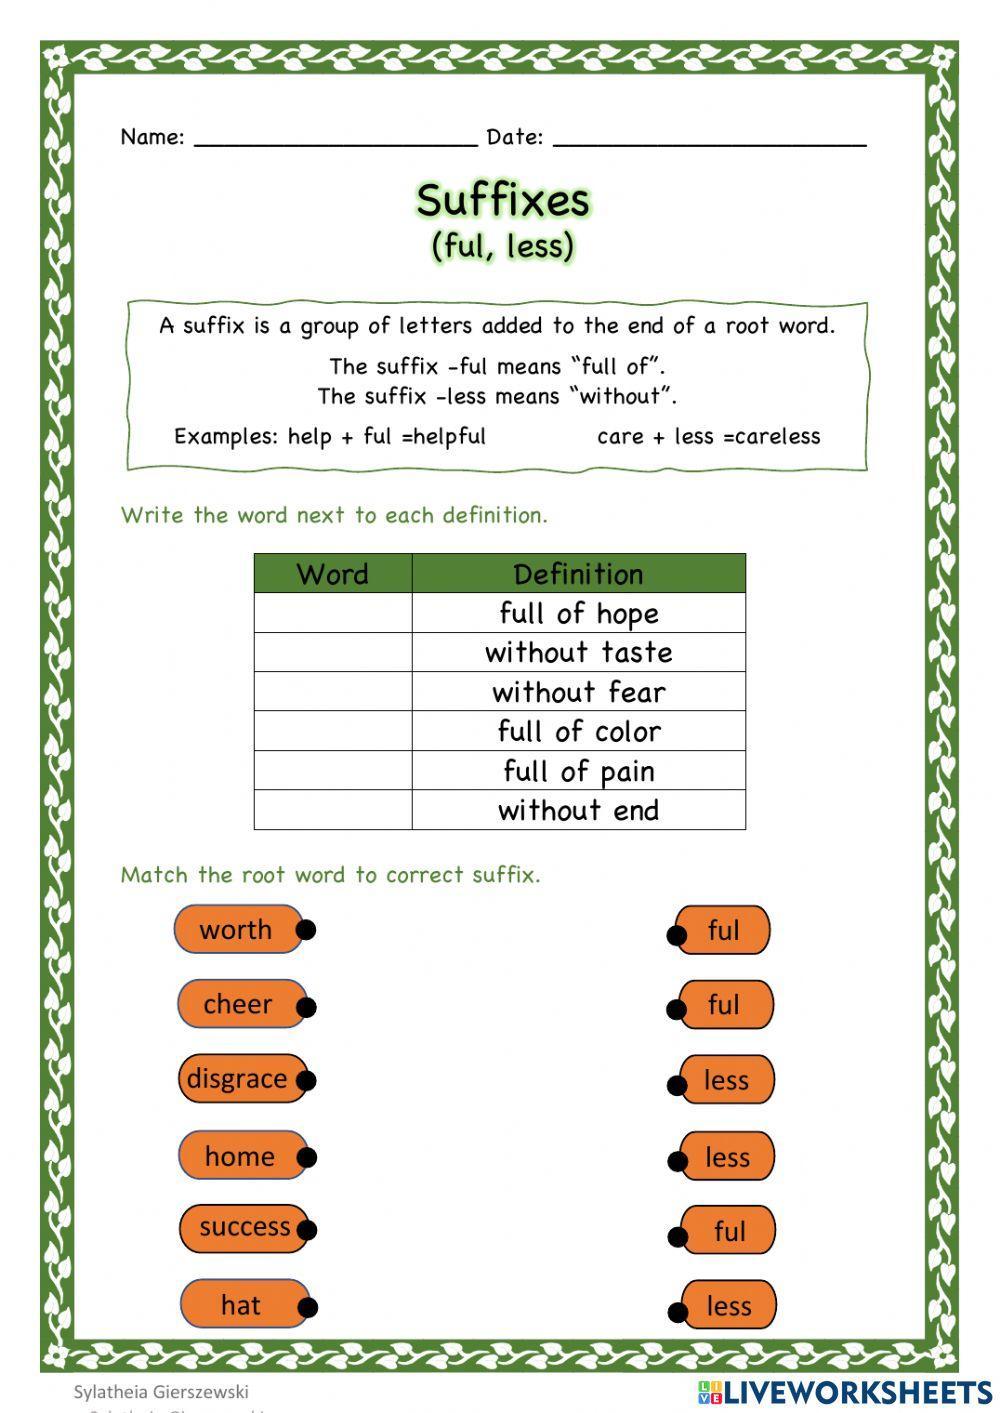 Suffixes (ful, less) worksheet | Live Worksheets